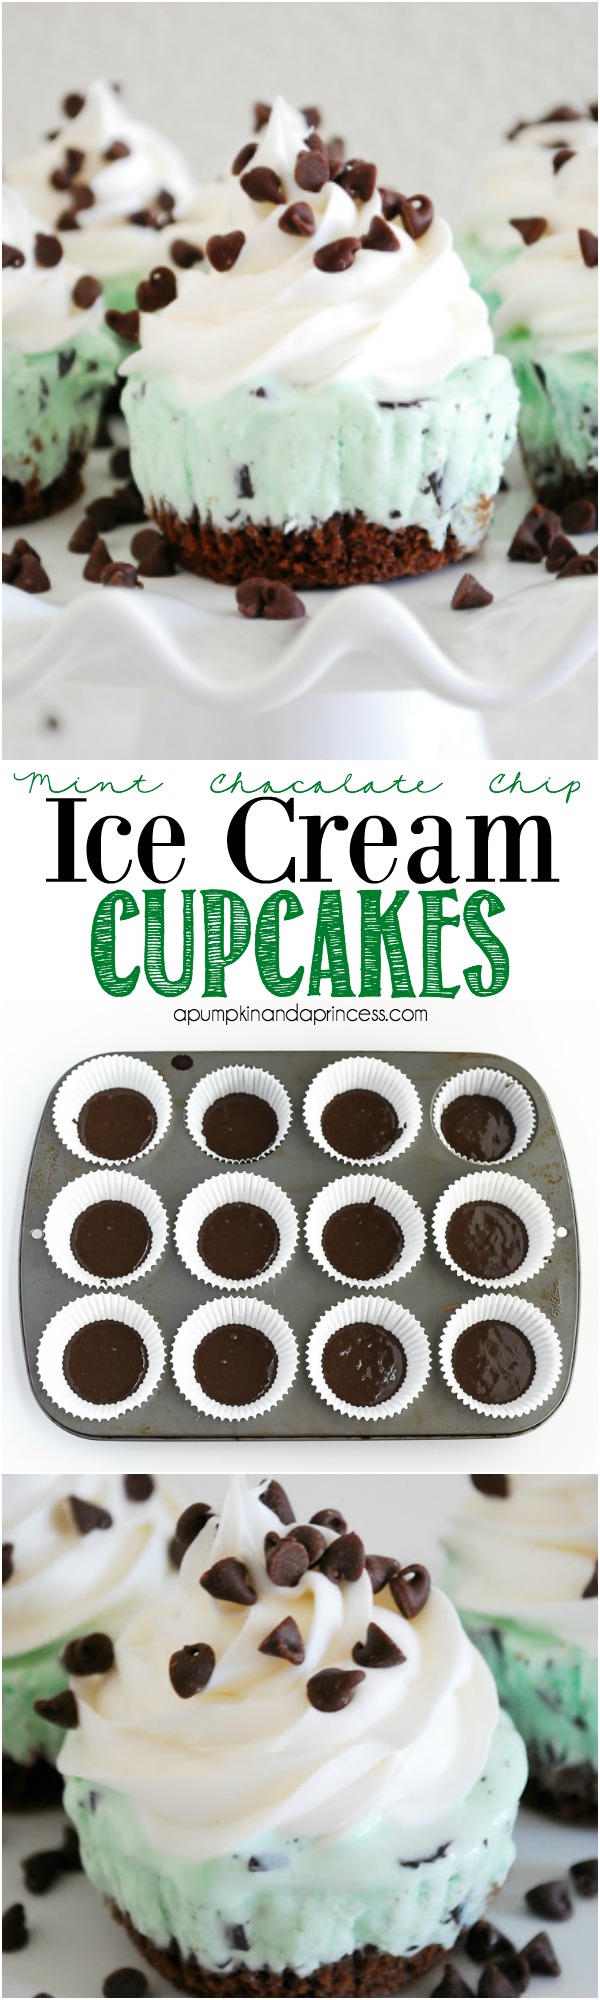 Mint Chocolate Chip Ice Cream Cupcakes - Layers of chocolate cake, mint chocolate chip ice cream, whipped topping, and mini chocolate chips.